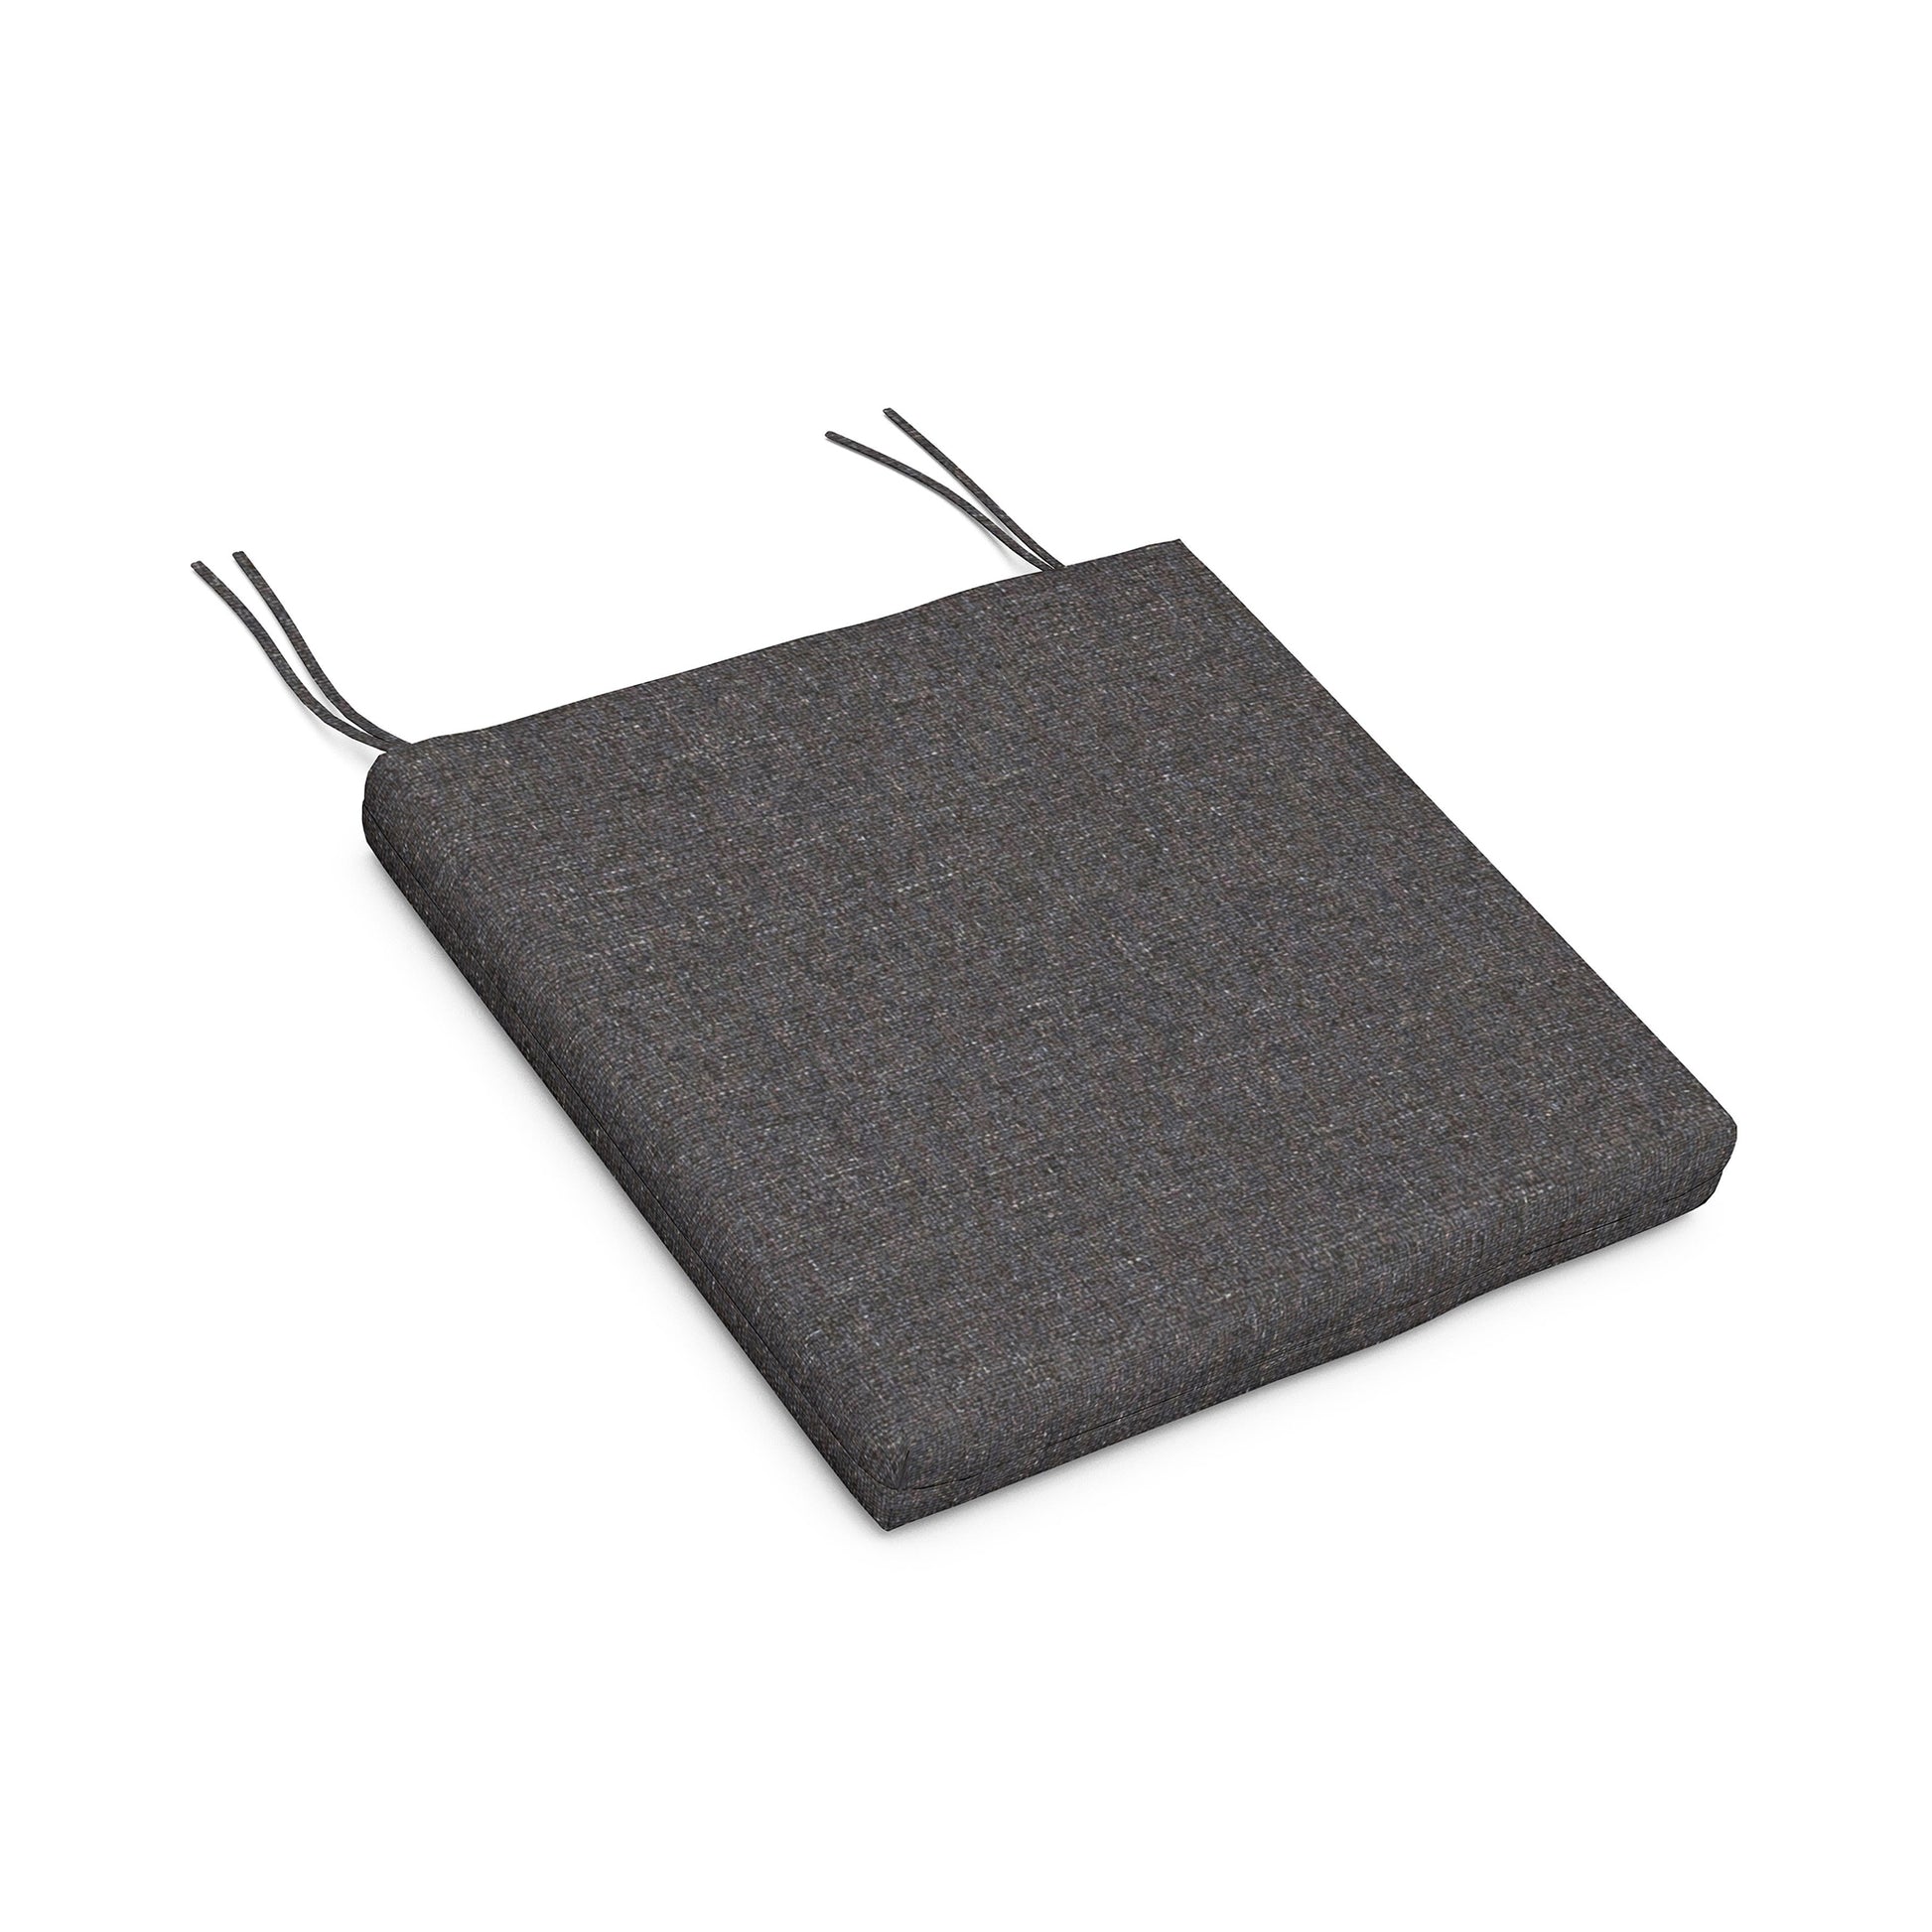 A gray POLYWOOD® XPWS0183 seat cushion with two protruding black straps, displayed on a white background.